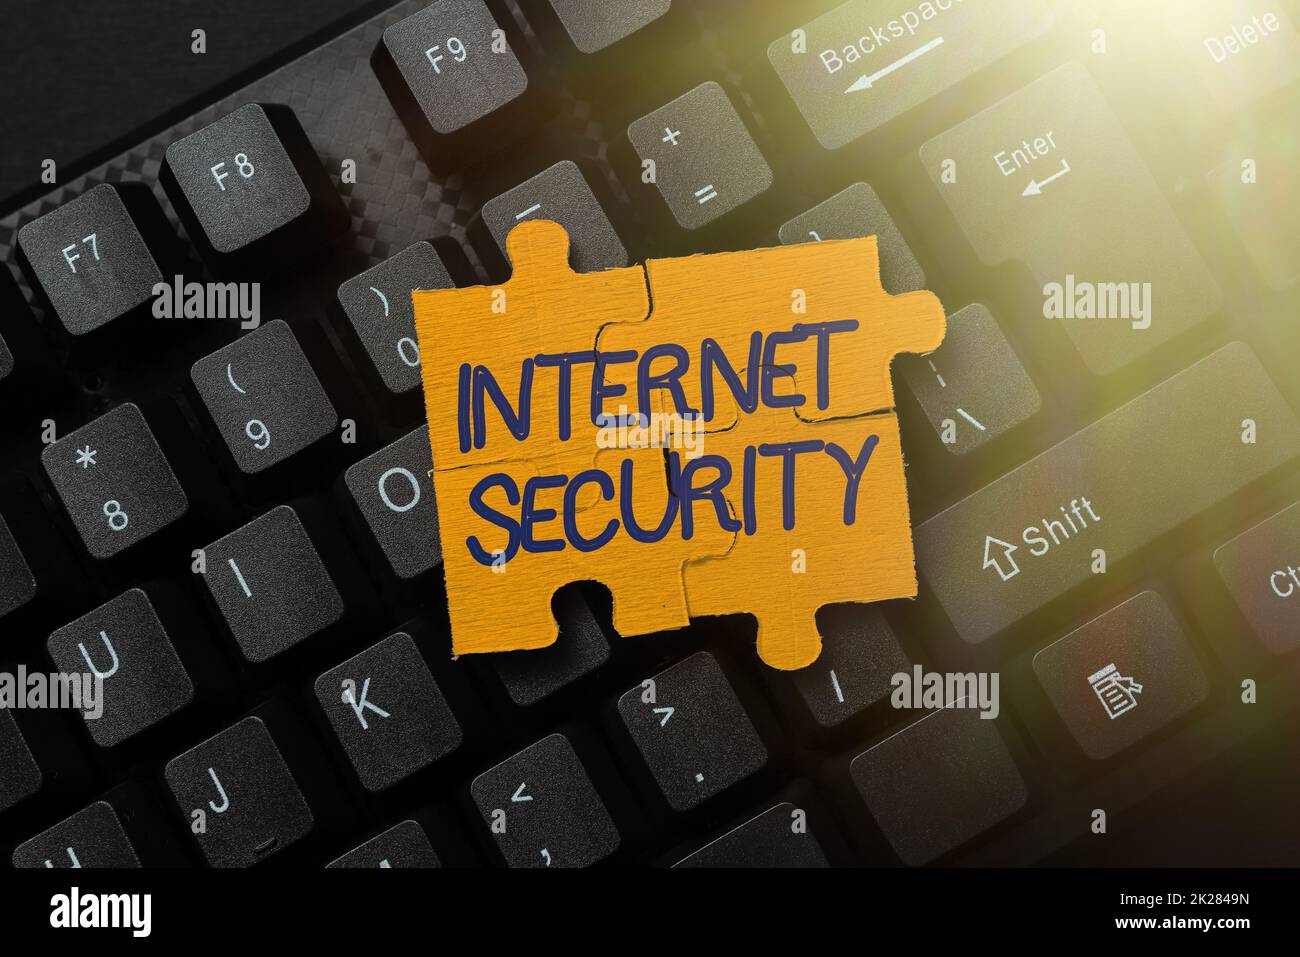 Text sign showing Internet Security. Conceptual photo process to protect against attacks over the Internet Connecting With Online Friends, Making Acquaintances On The Internet Stock Photo